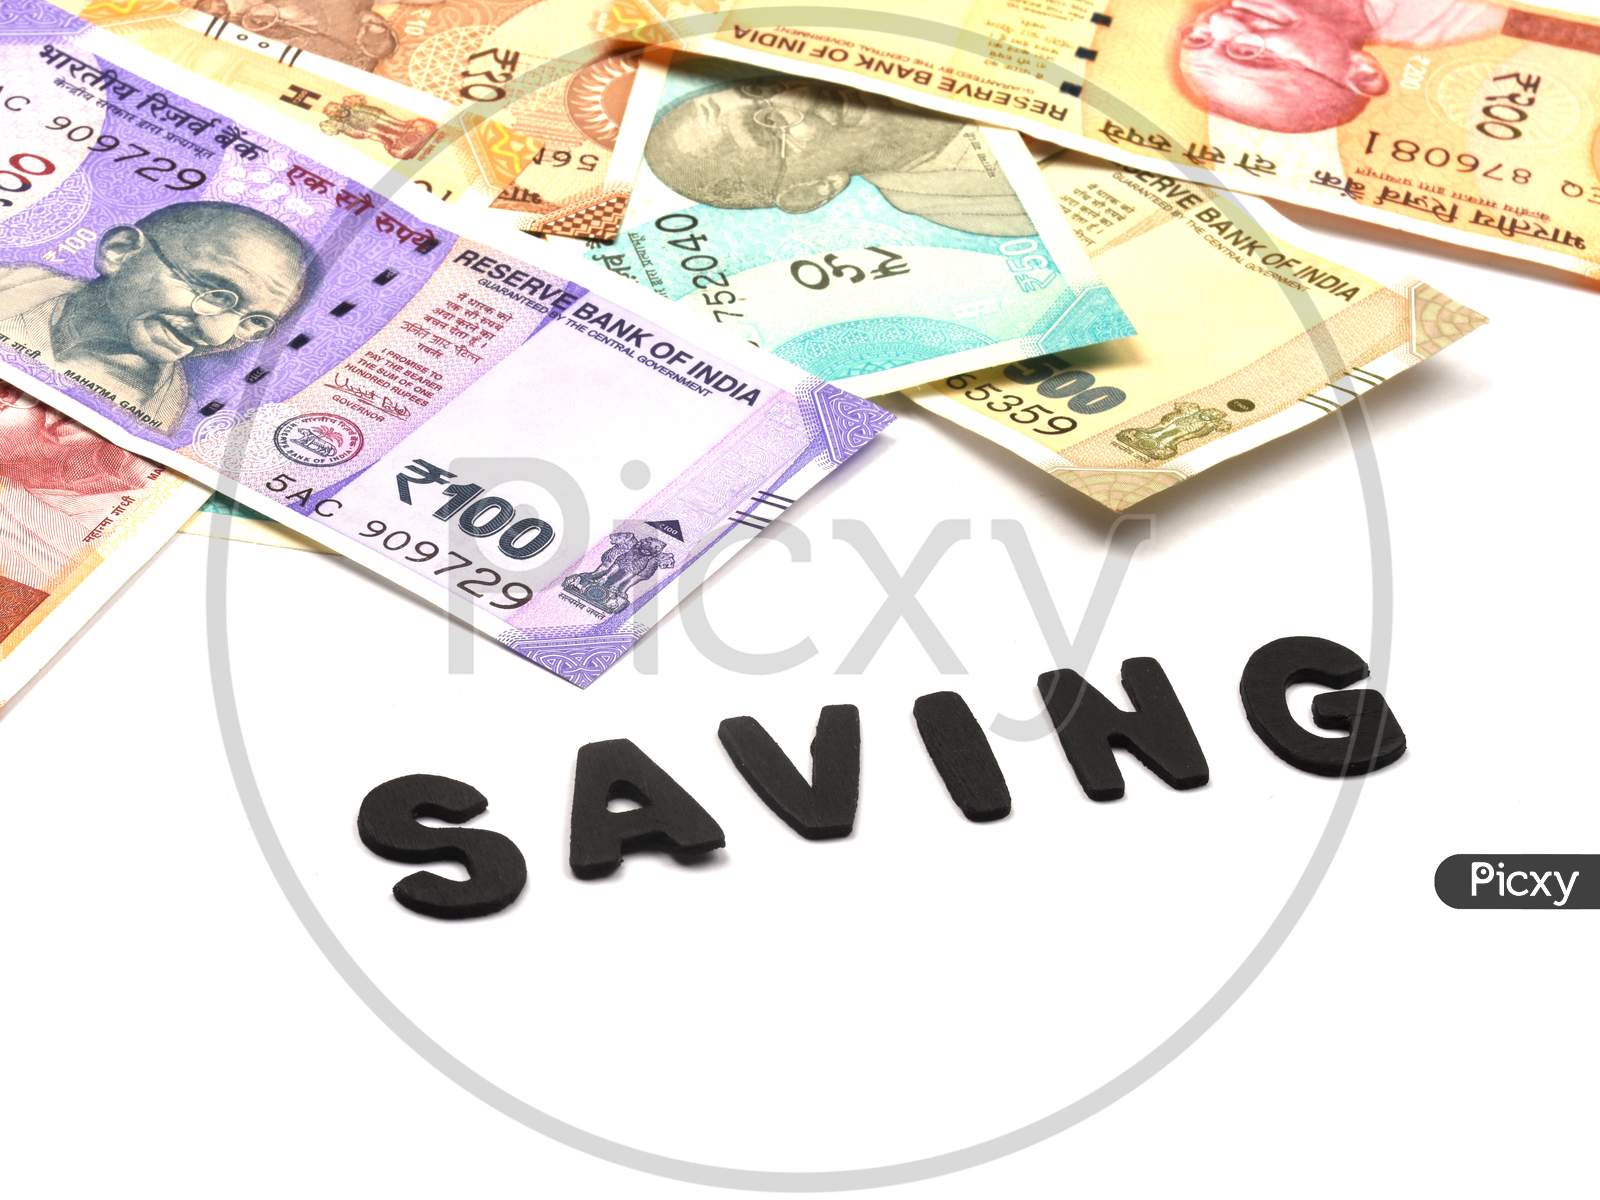 Saving Money Concept,Saving Alphabet On Money Background,Indian Currency, Rupee, Indian Rupee,Indian Money, Business, Finance, Investment, Saving And Corruption Concept - Image